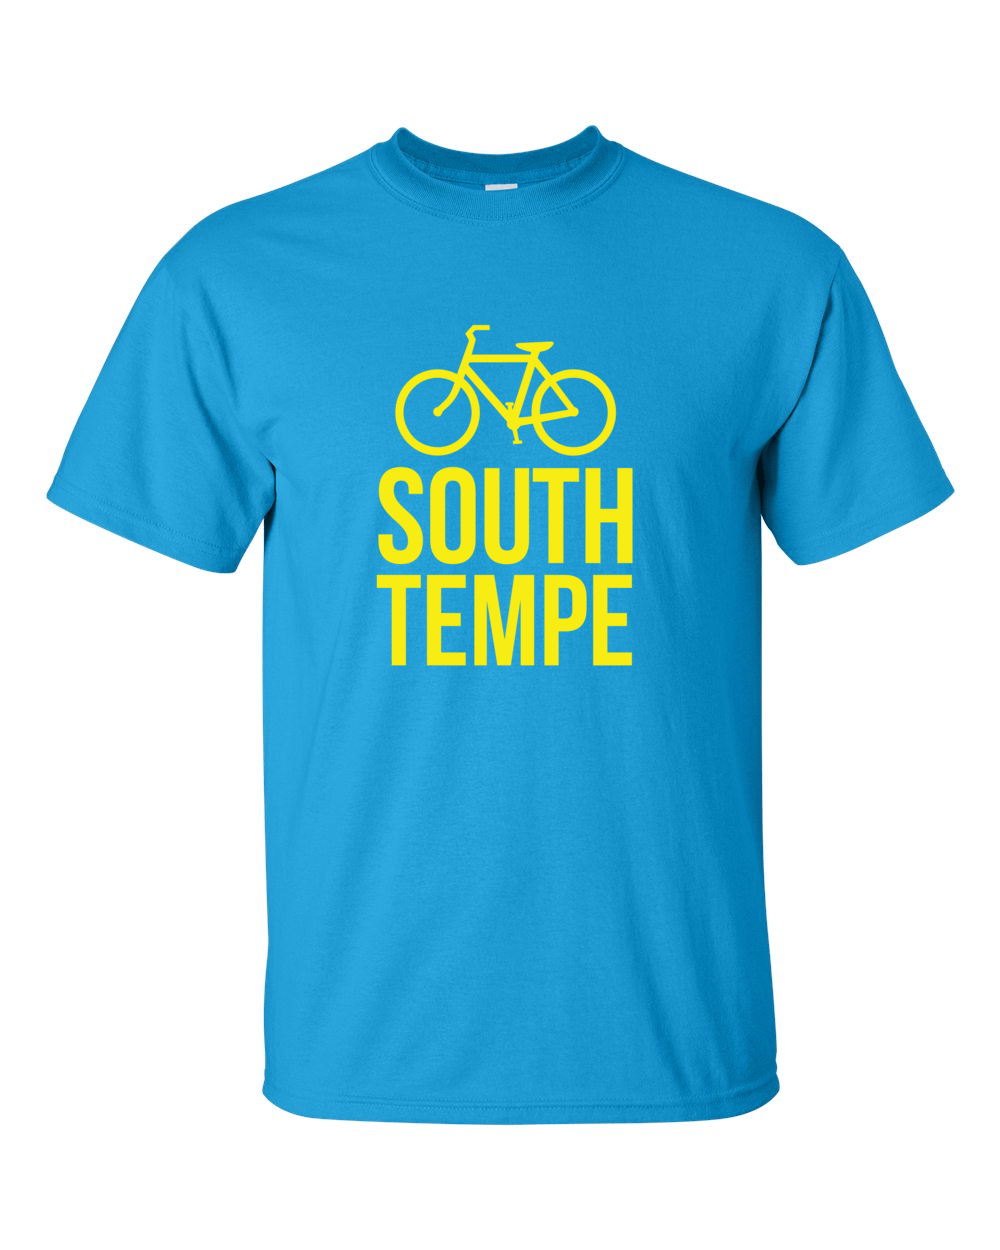 Image of South Tempe - Turquoise Shirt with Limón Yellow Letters